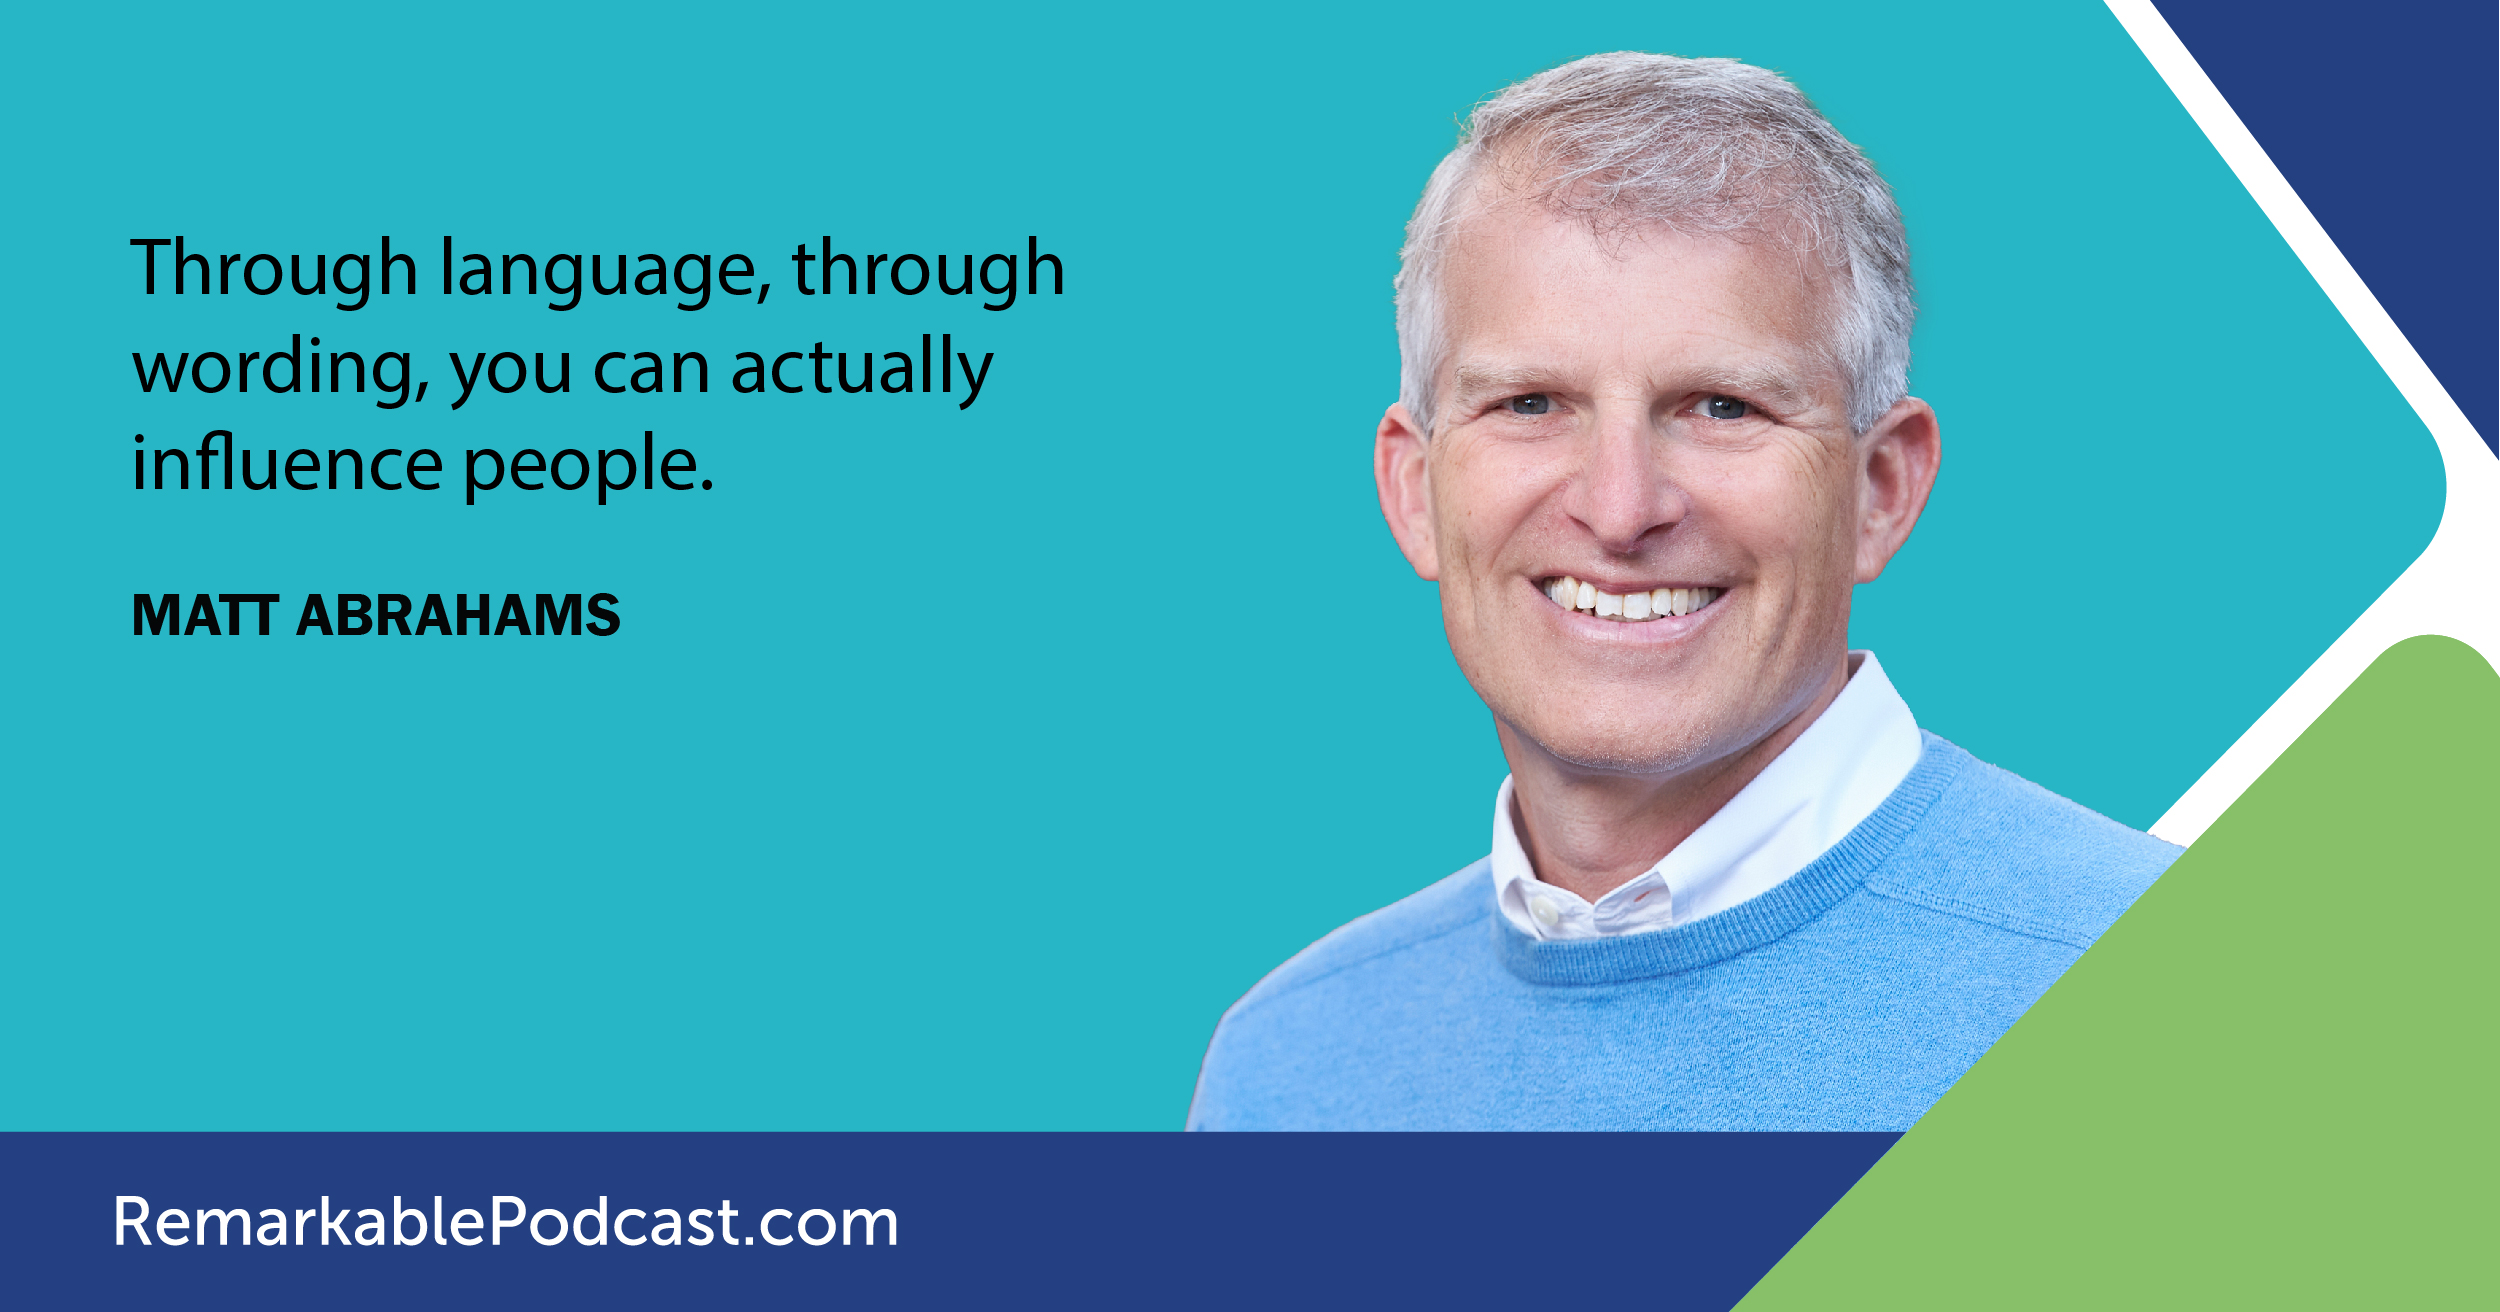 Through language, through wording, you can actually influence people. Said by Matt Abrahams
